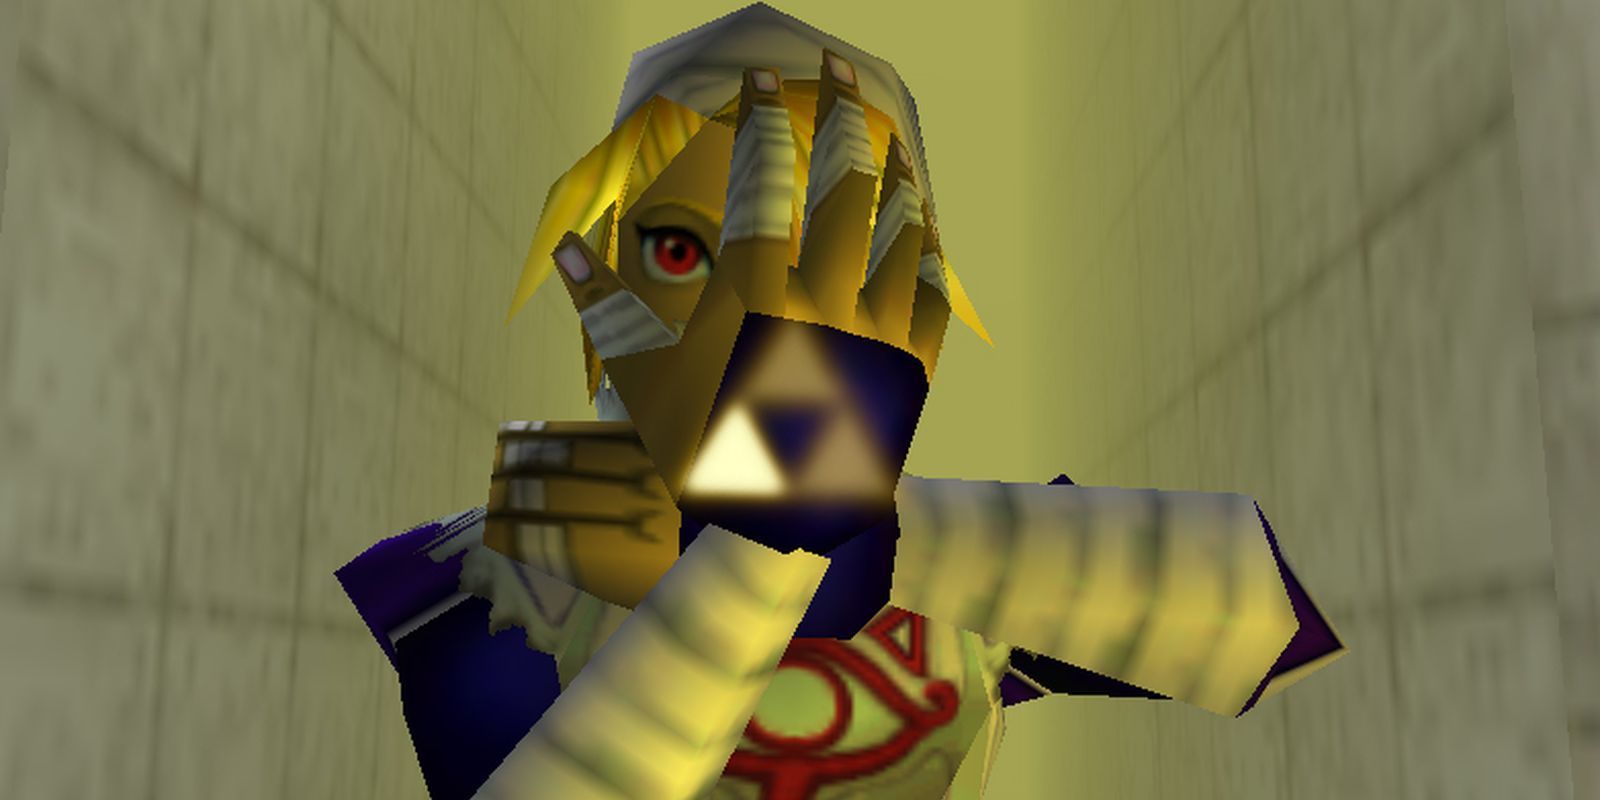 Sheik holding up her hand with the triforce symbol on its back in Ocarina of Time.